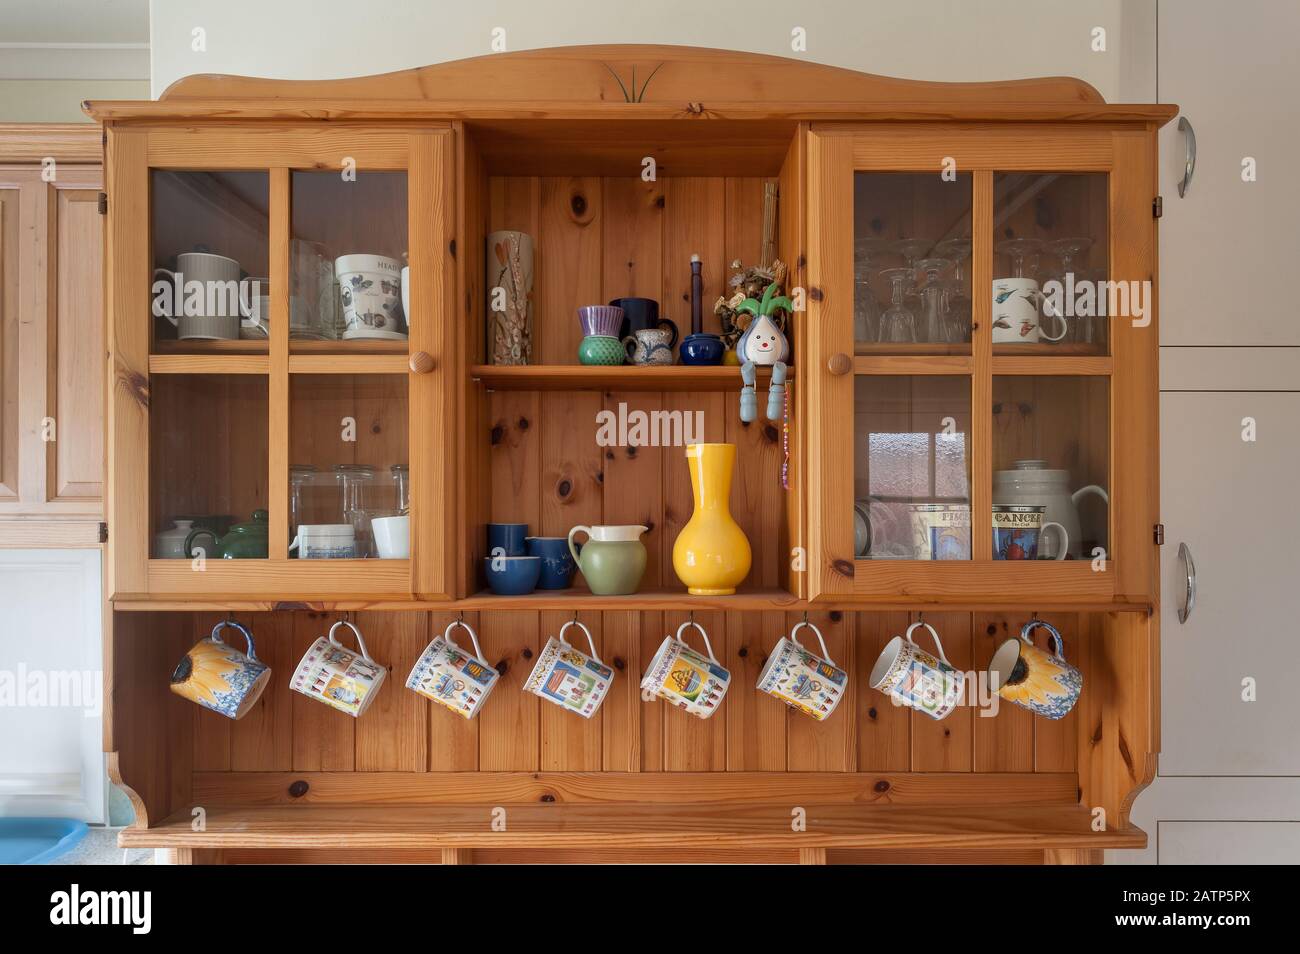 Obsessive compulsive disorder where everything has to be organised in the kitchen welsh dresser is just such a way for neatness methodically, arranged Stock Photo